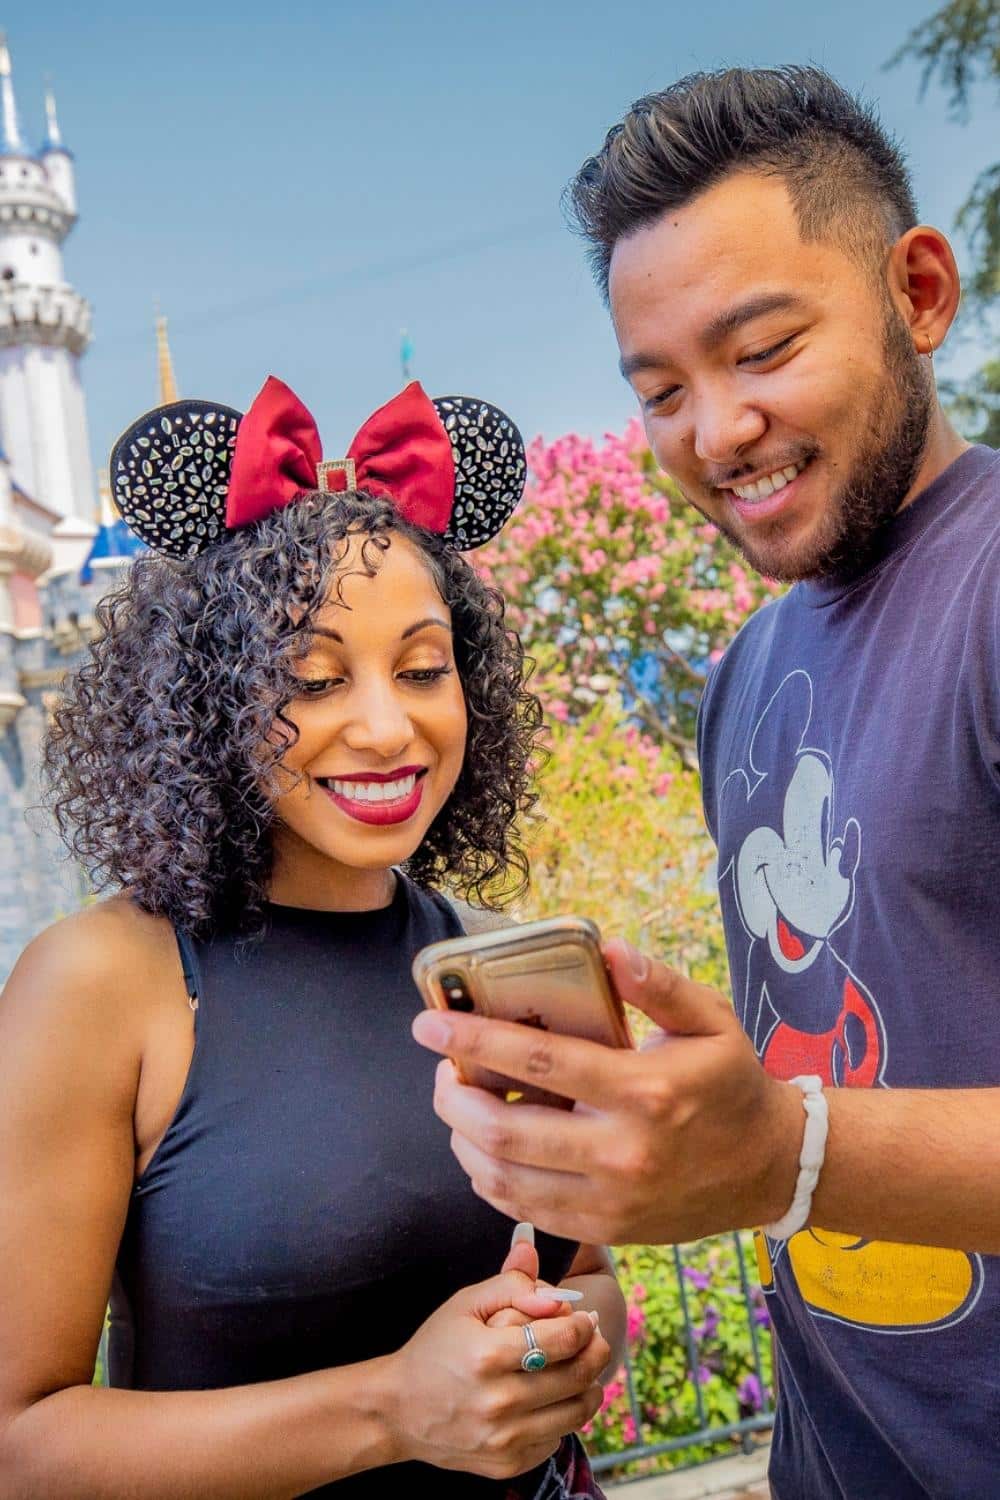 Photo of a man and woman looking at a mobile phone while at Disneyland.